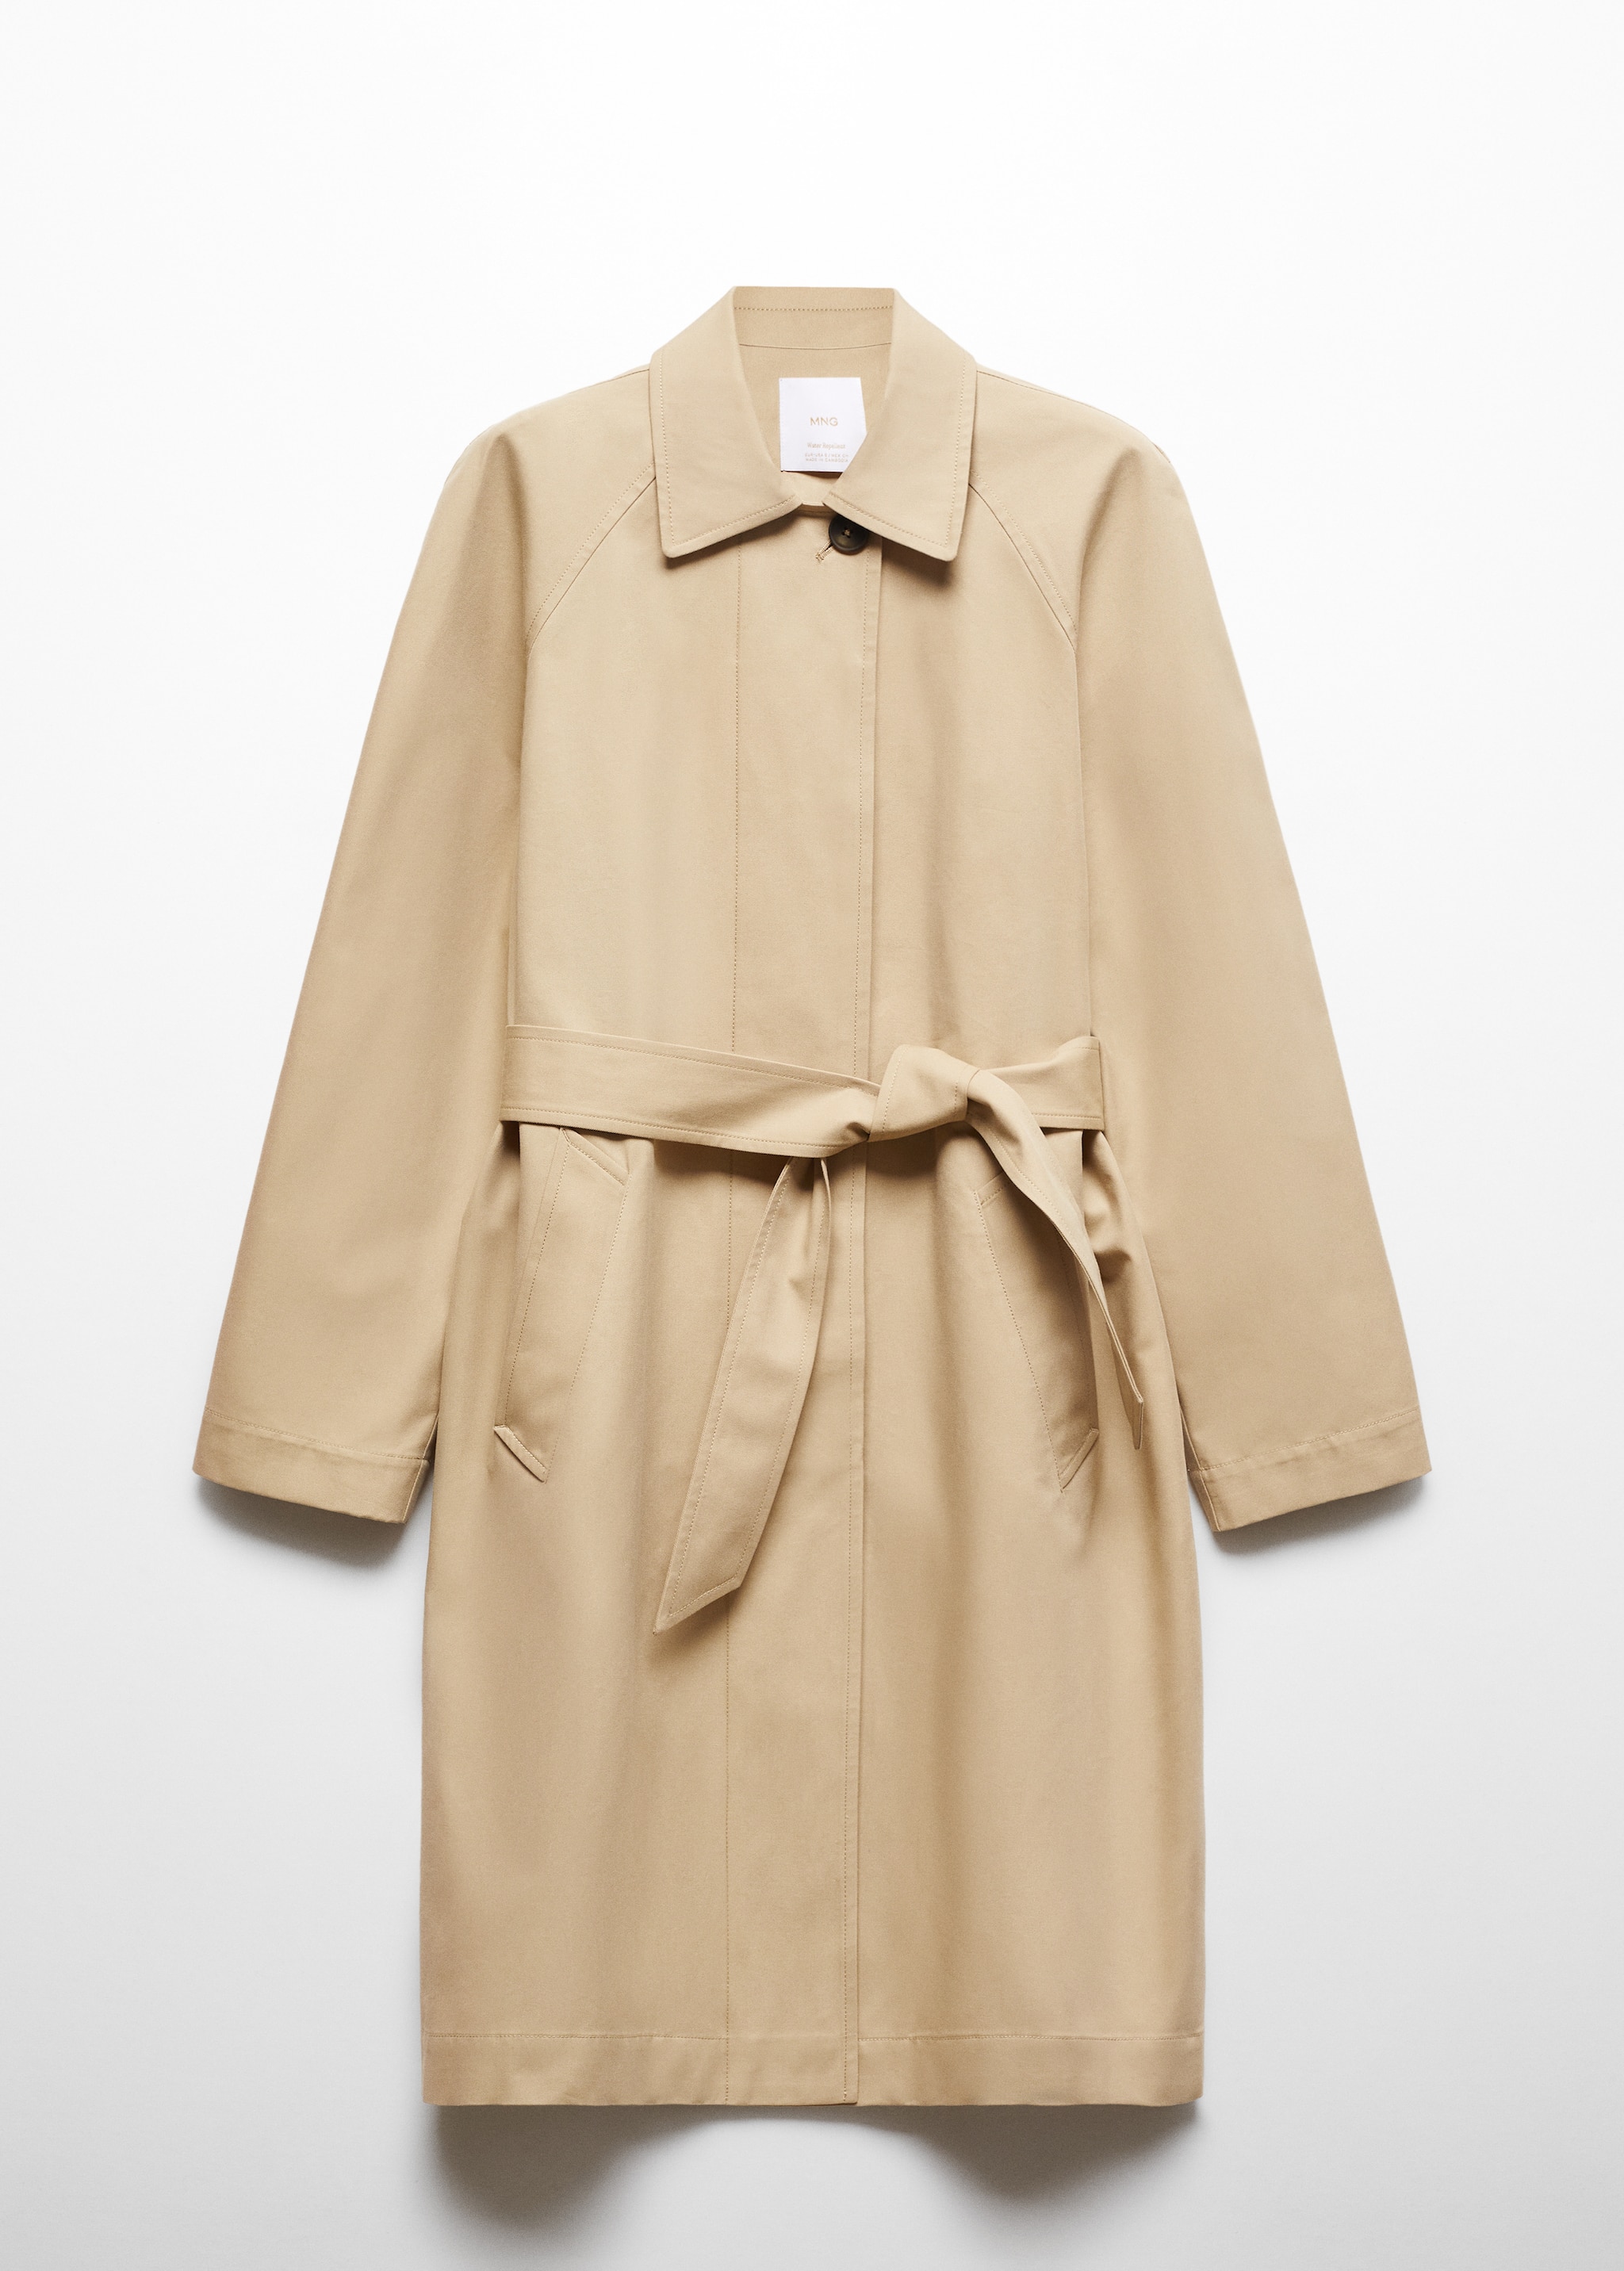 Cotton trench coat with belt - Article without model